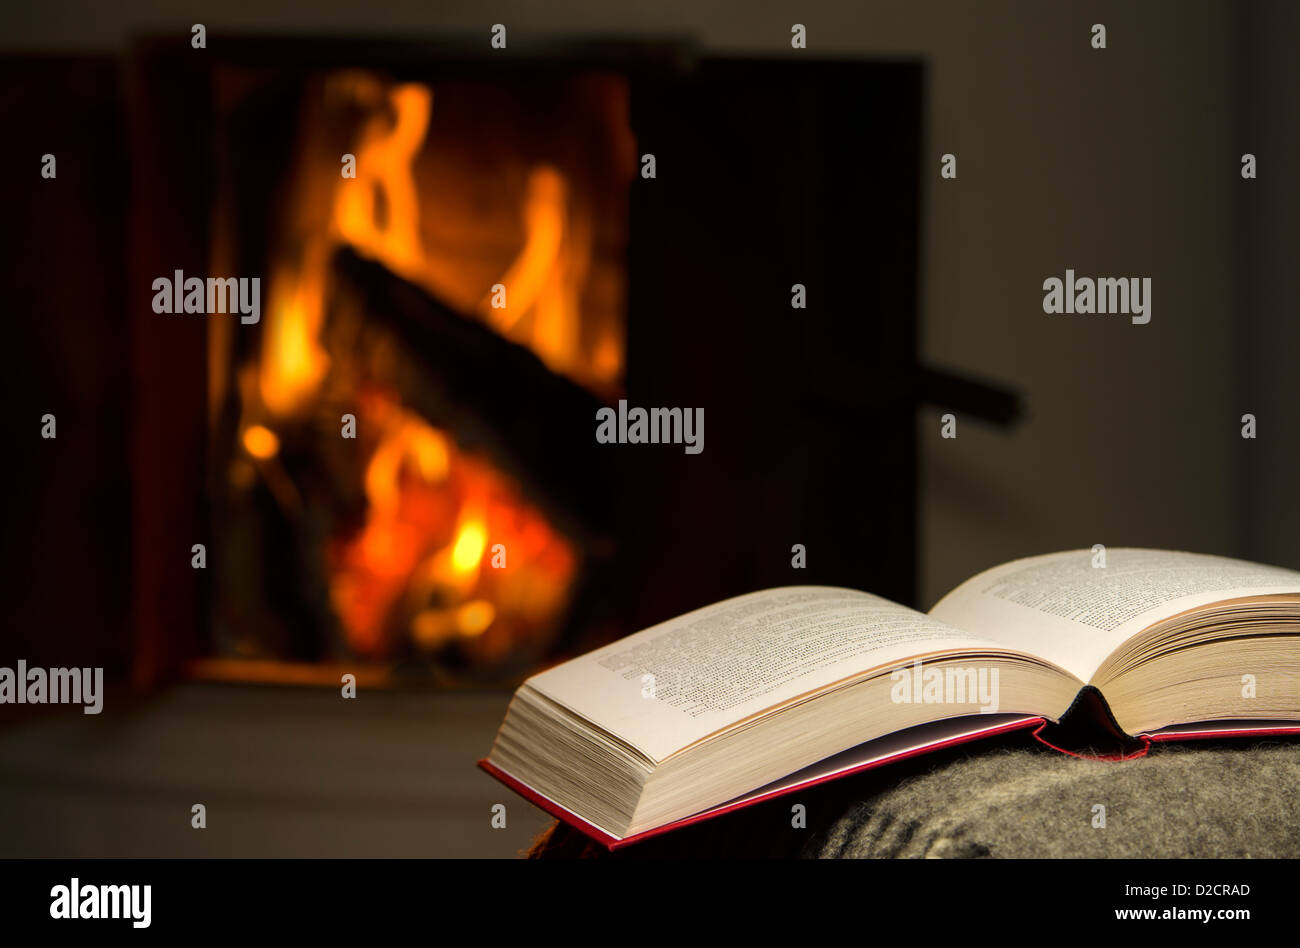 Peaceful image of open book resting on a arm rest of a couch. Warm fireplace on background. Stock Photo